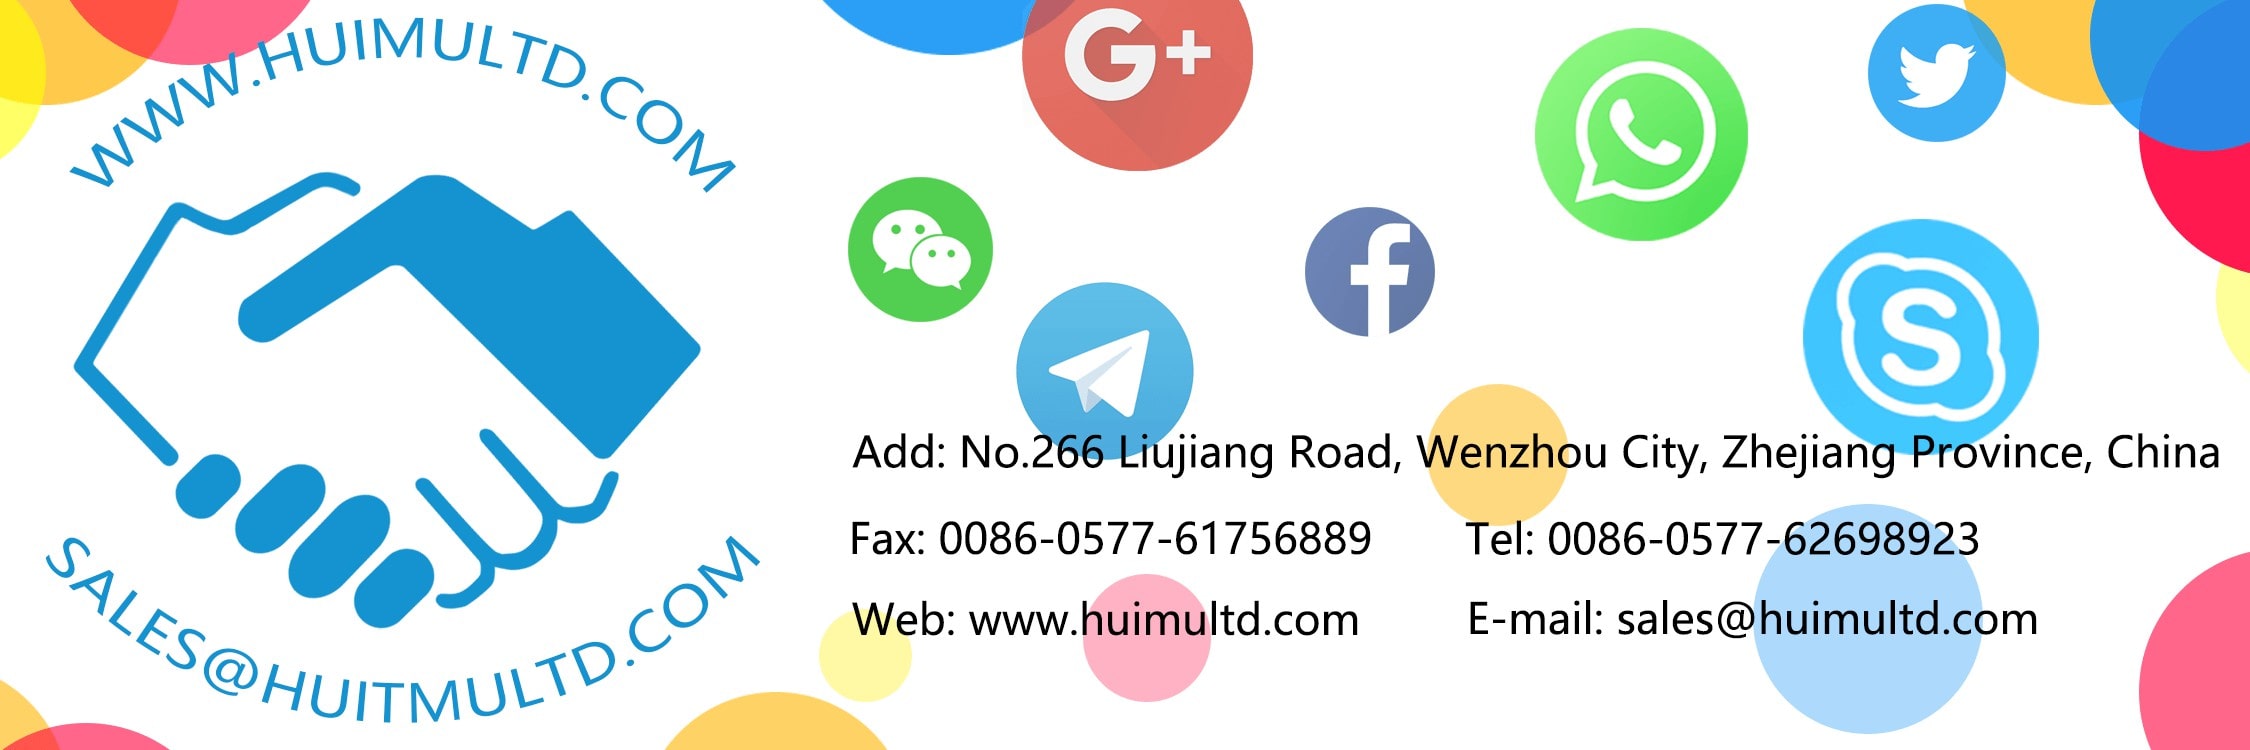 HUIMU Industrial specializes in providing industrial control products (such as Solid State Relays) and solutions, and consists of two companies: HUIMU Trade and MGR. ADD: No.266 Liujiang Road, Wenzhou, Zhejiang, China, E-mail: sales@huimultd.com, WEB: www.huimultd.com, TEL: 0086-‭0577-62698923,‬ FAX:0086-0577-61756889